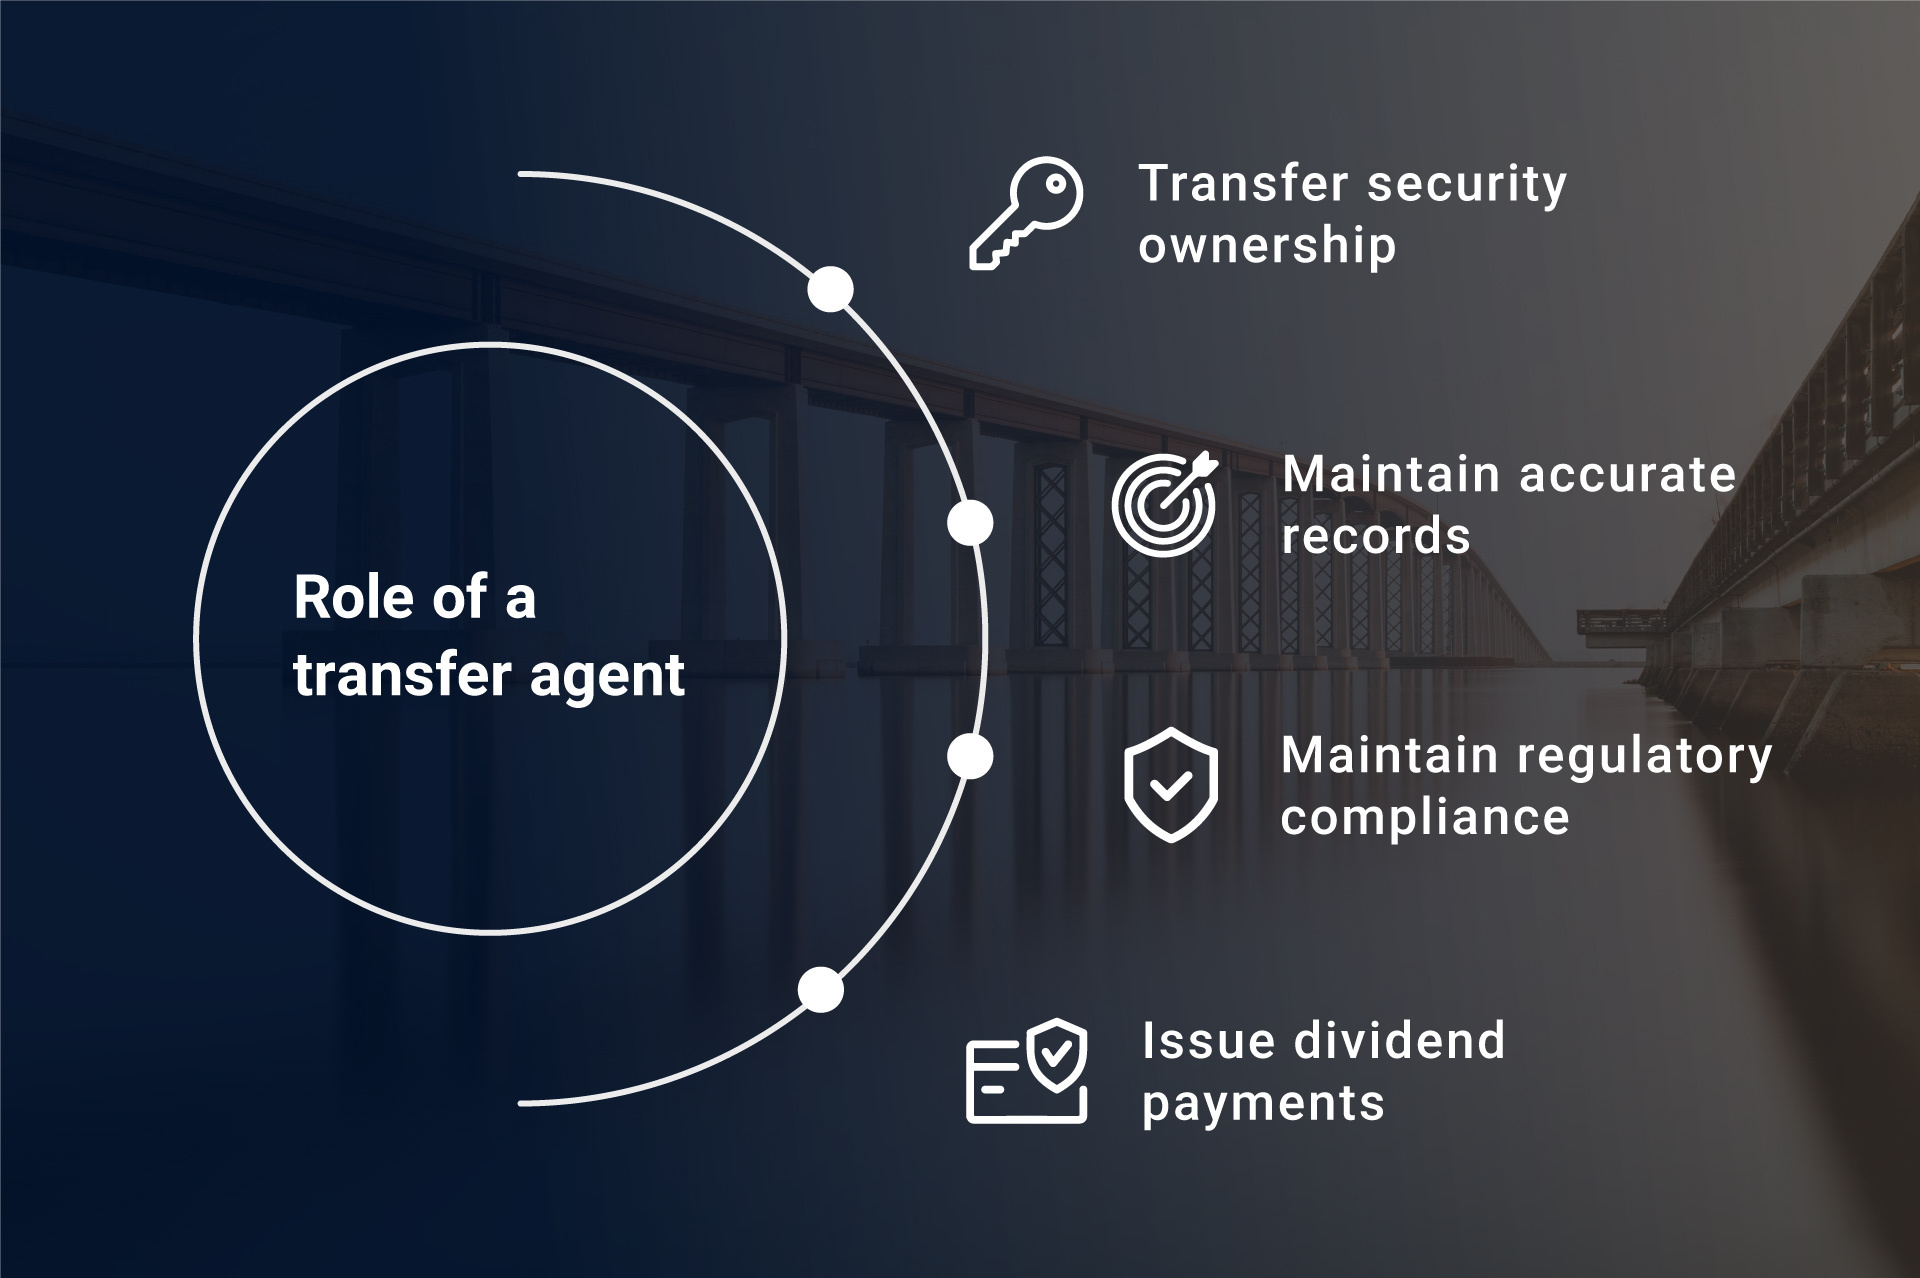 "The Role of a Transfer Agent" in a circle surrounded by bullet points for "Transfer security ownership," "Maintain accurate records," "Maintain regulatory compliance," and "Issue dividend payments." 